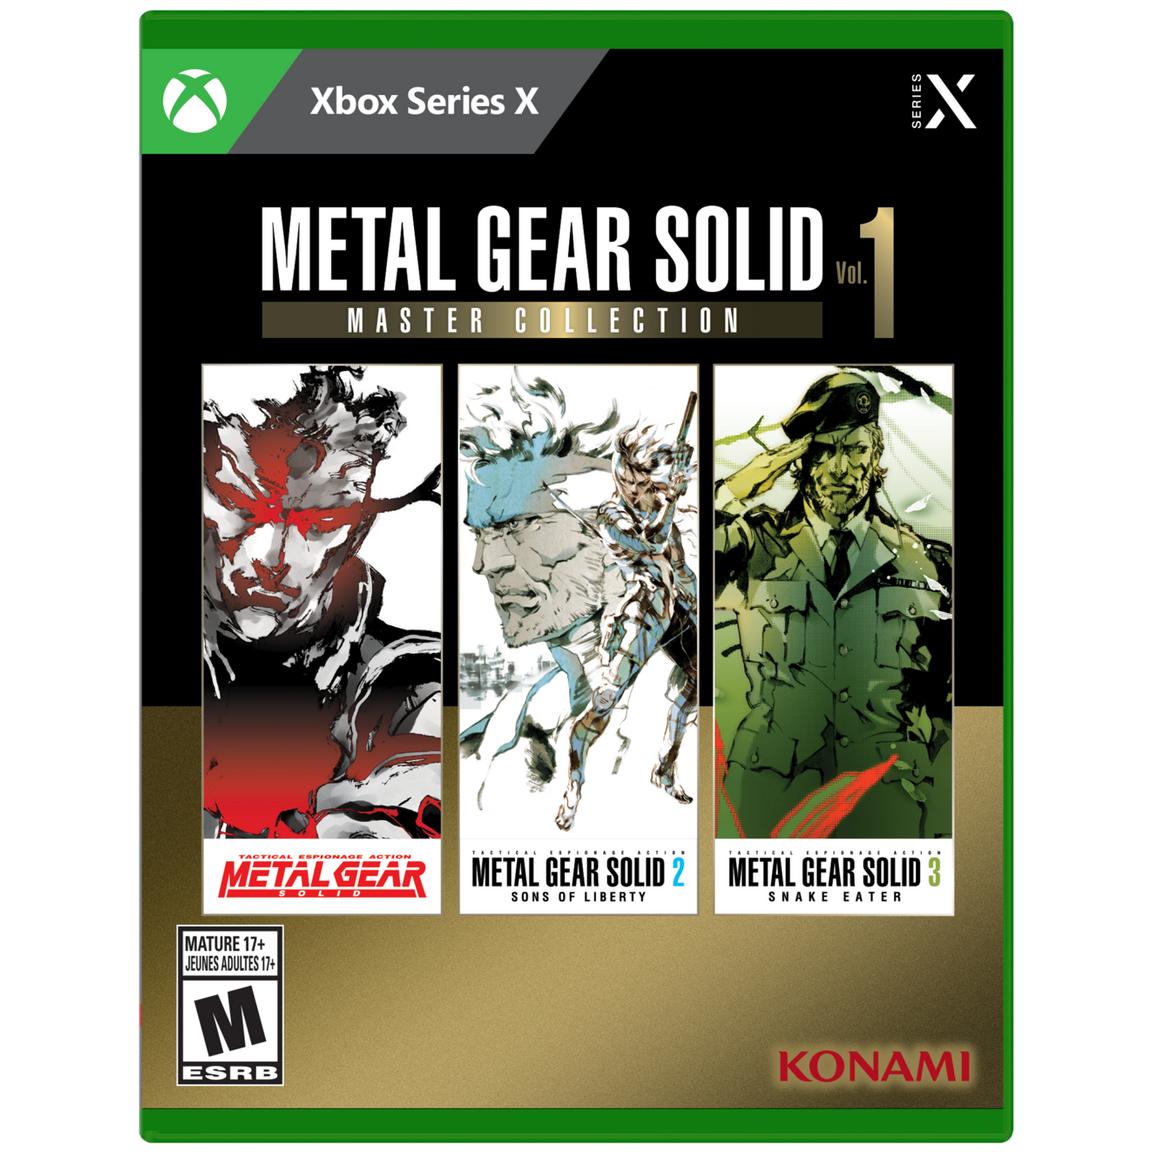 Metal Gear Solid: Master Collection Vol.1 - Xbox Series X, Xbox One, Pre-Owned